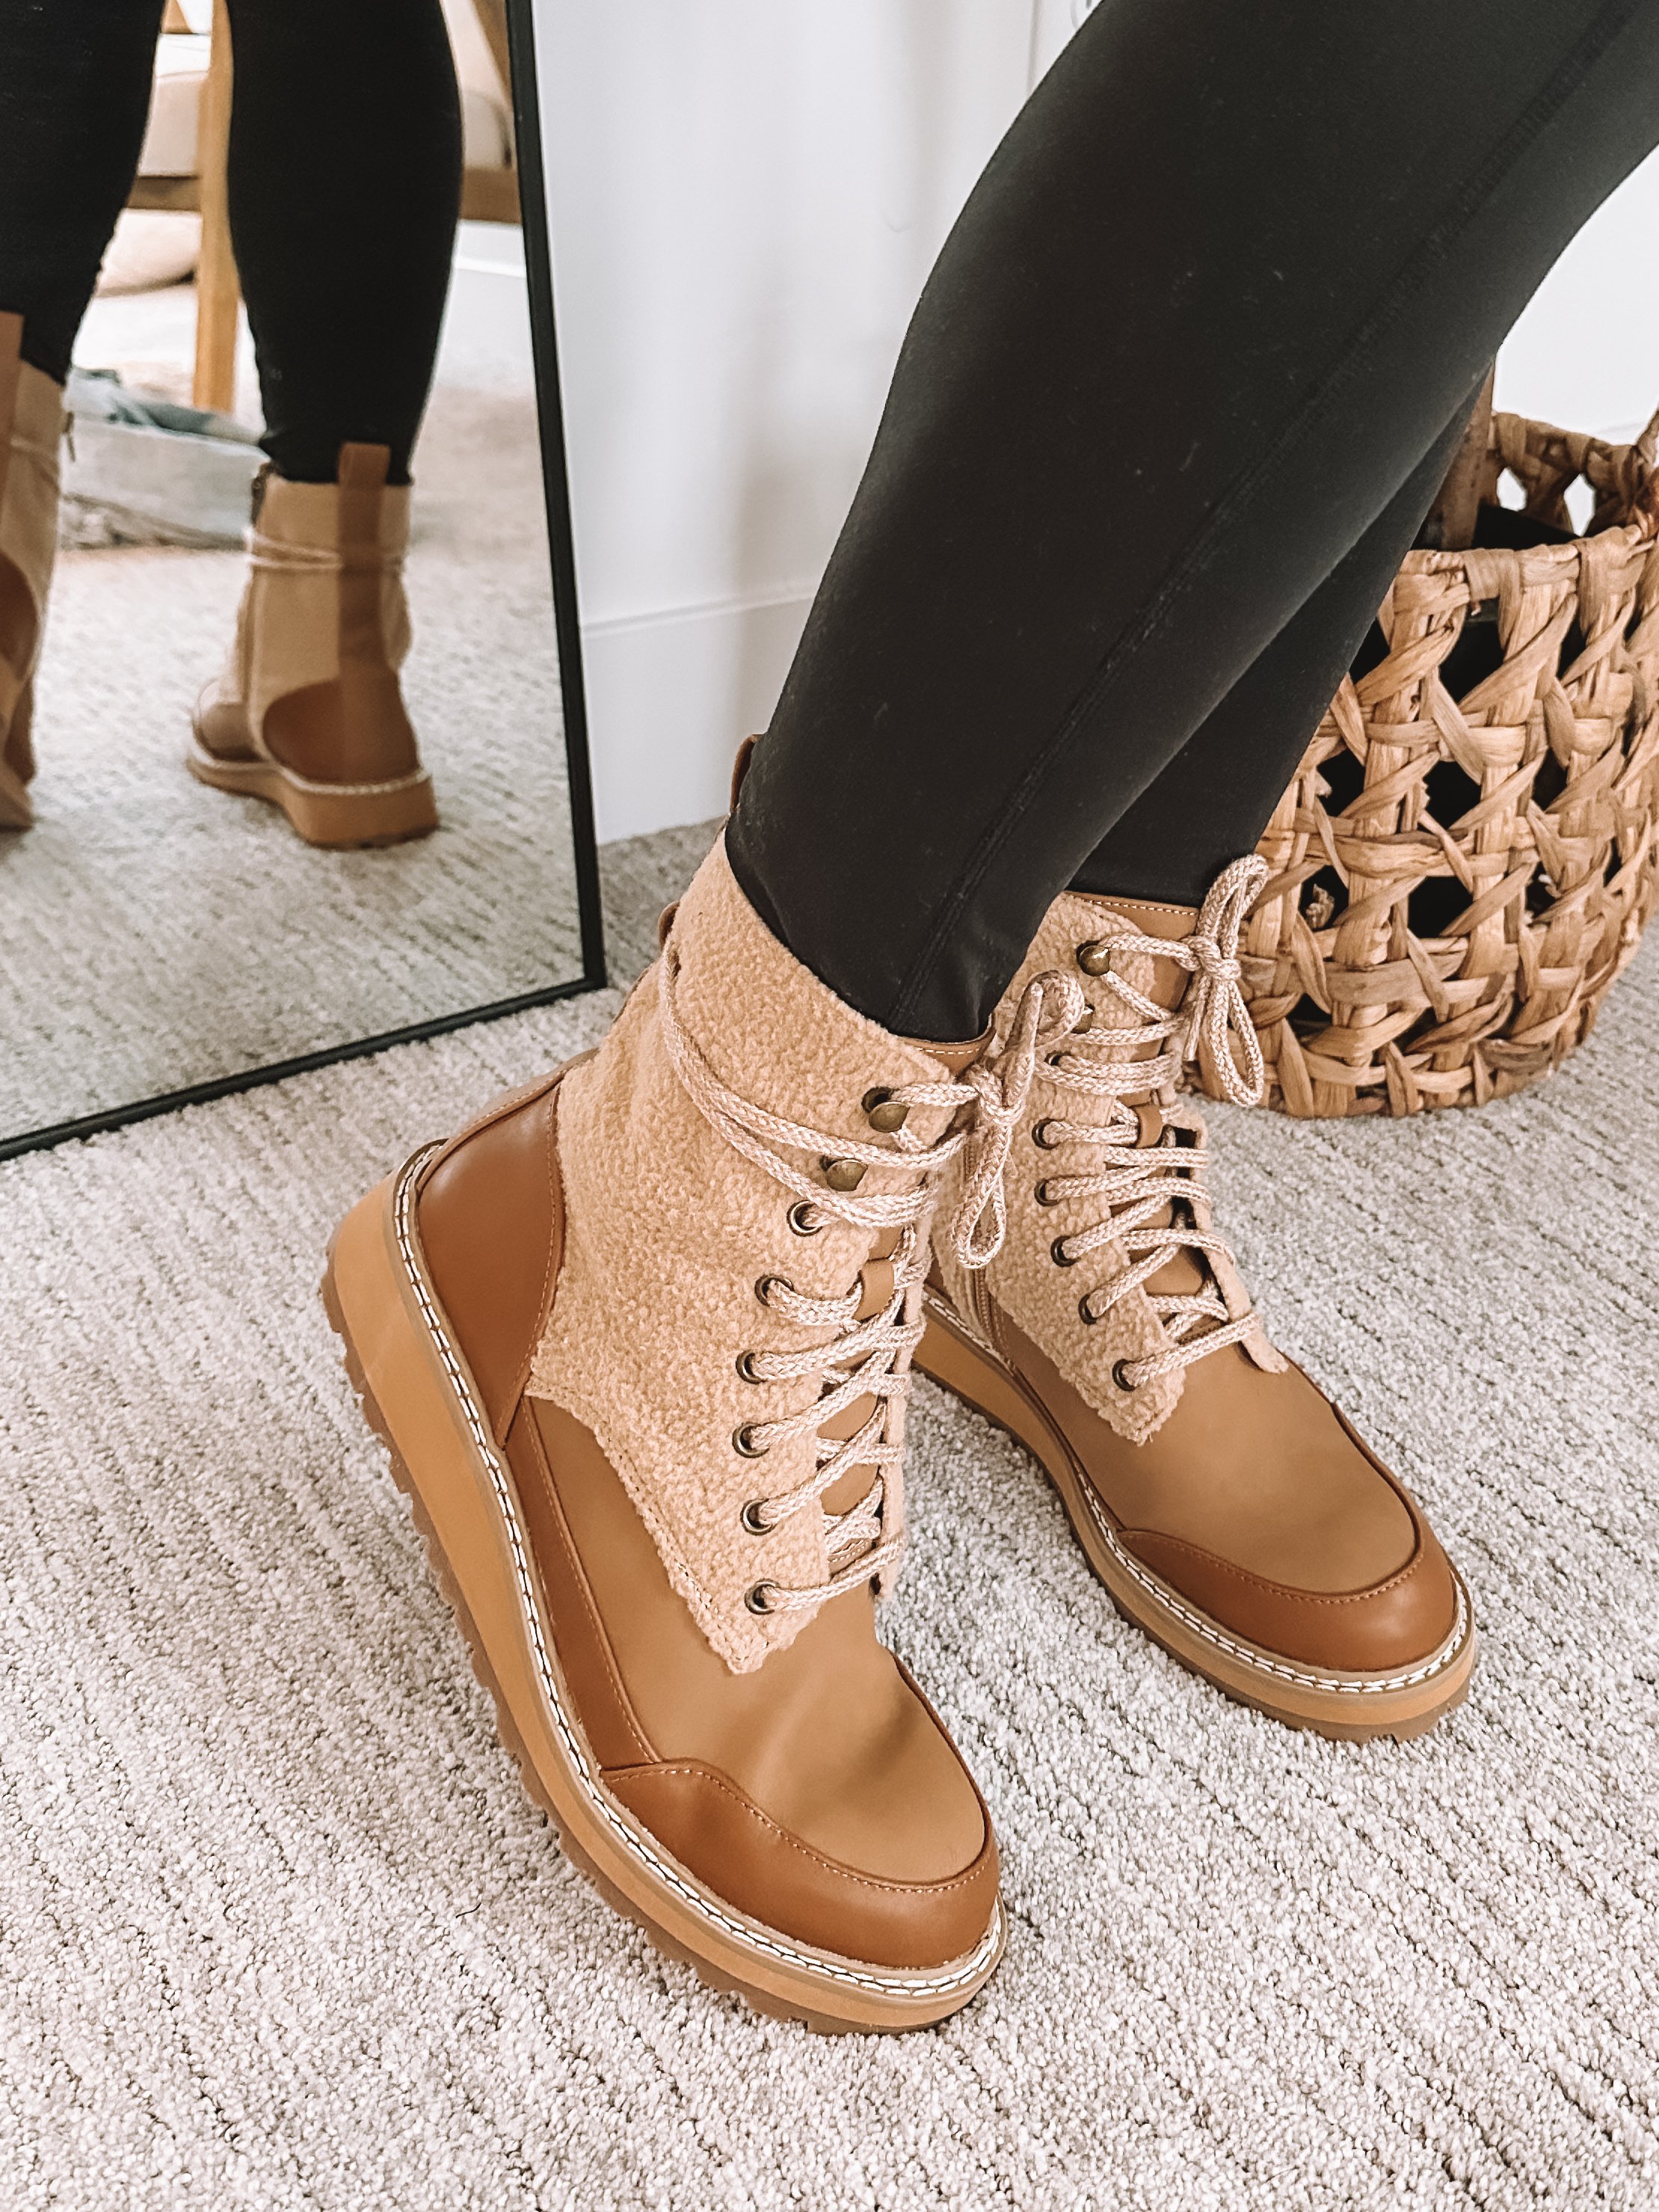 Target Boots - Tan-Brown Lace Up Combat Boots